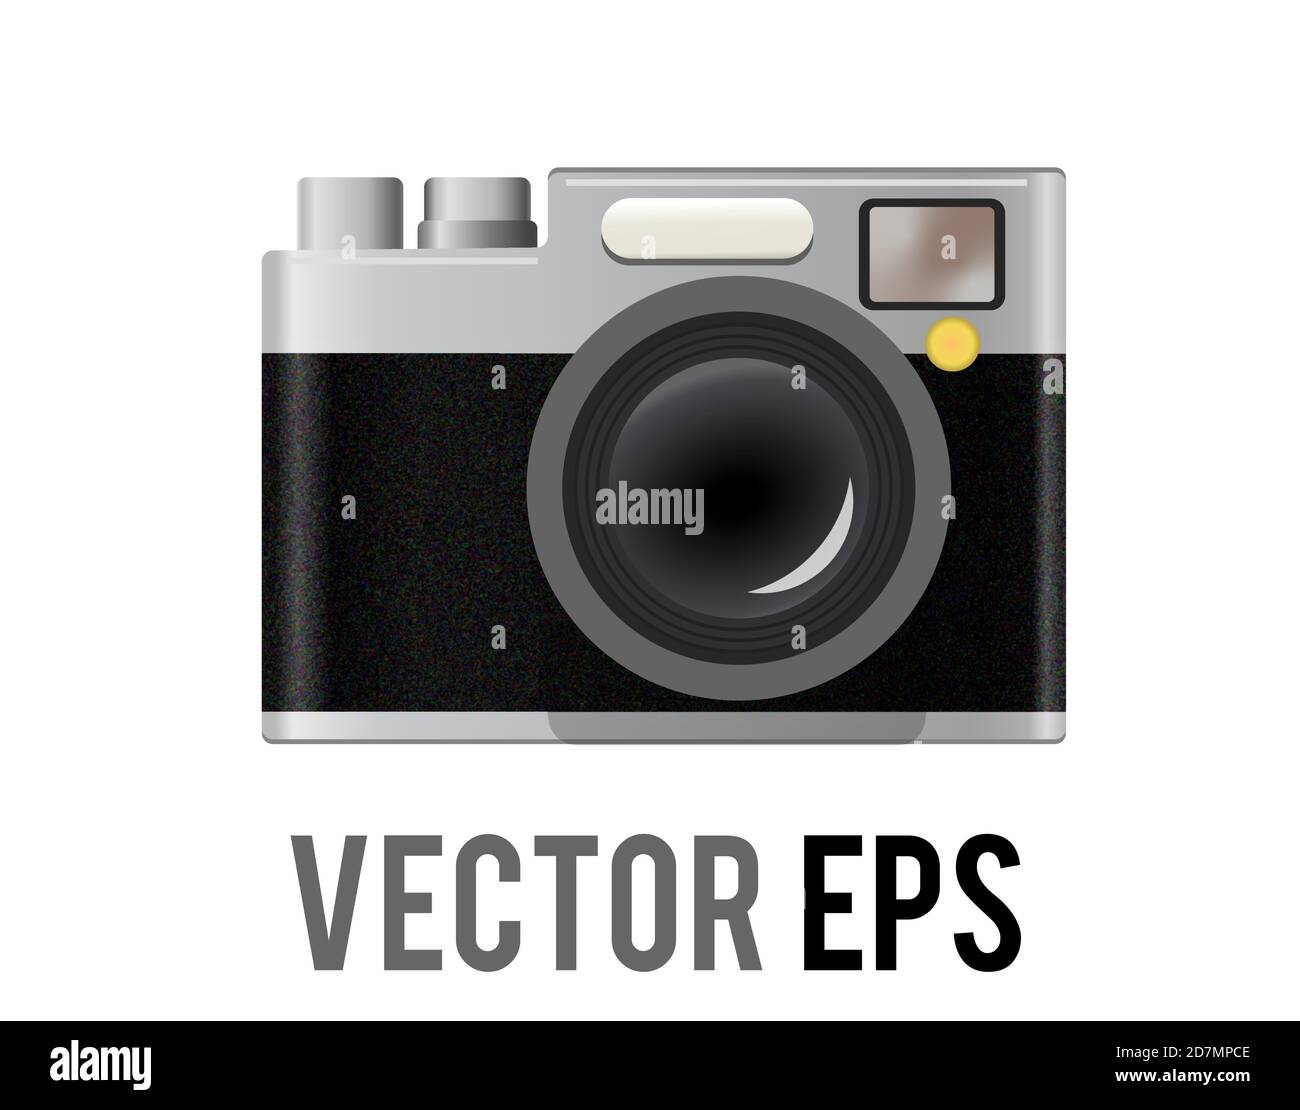 The isolated vector classic profession black, silver casing camera icon with lens, shutter button, view finder and operating controls Stock Vector